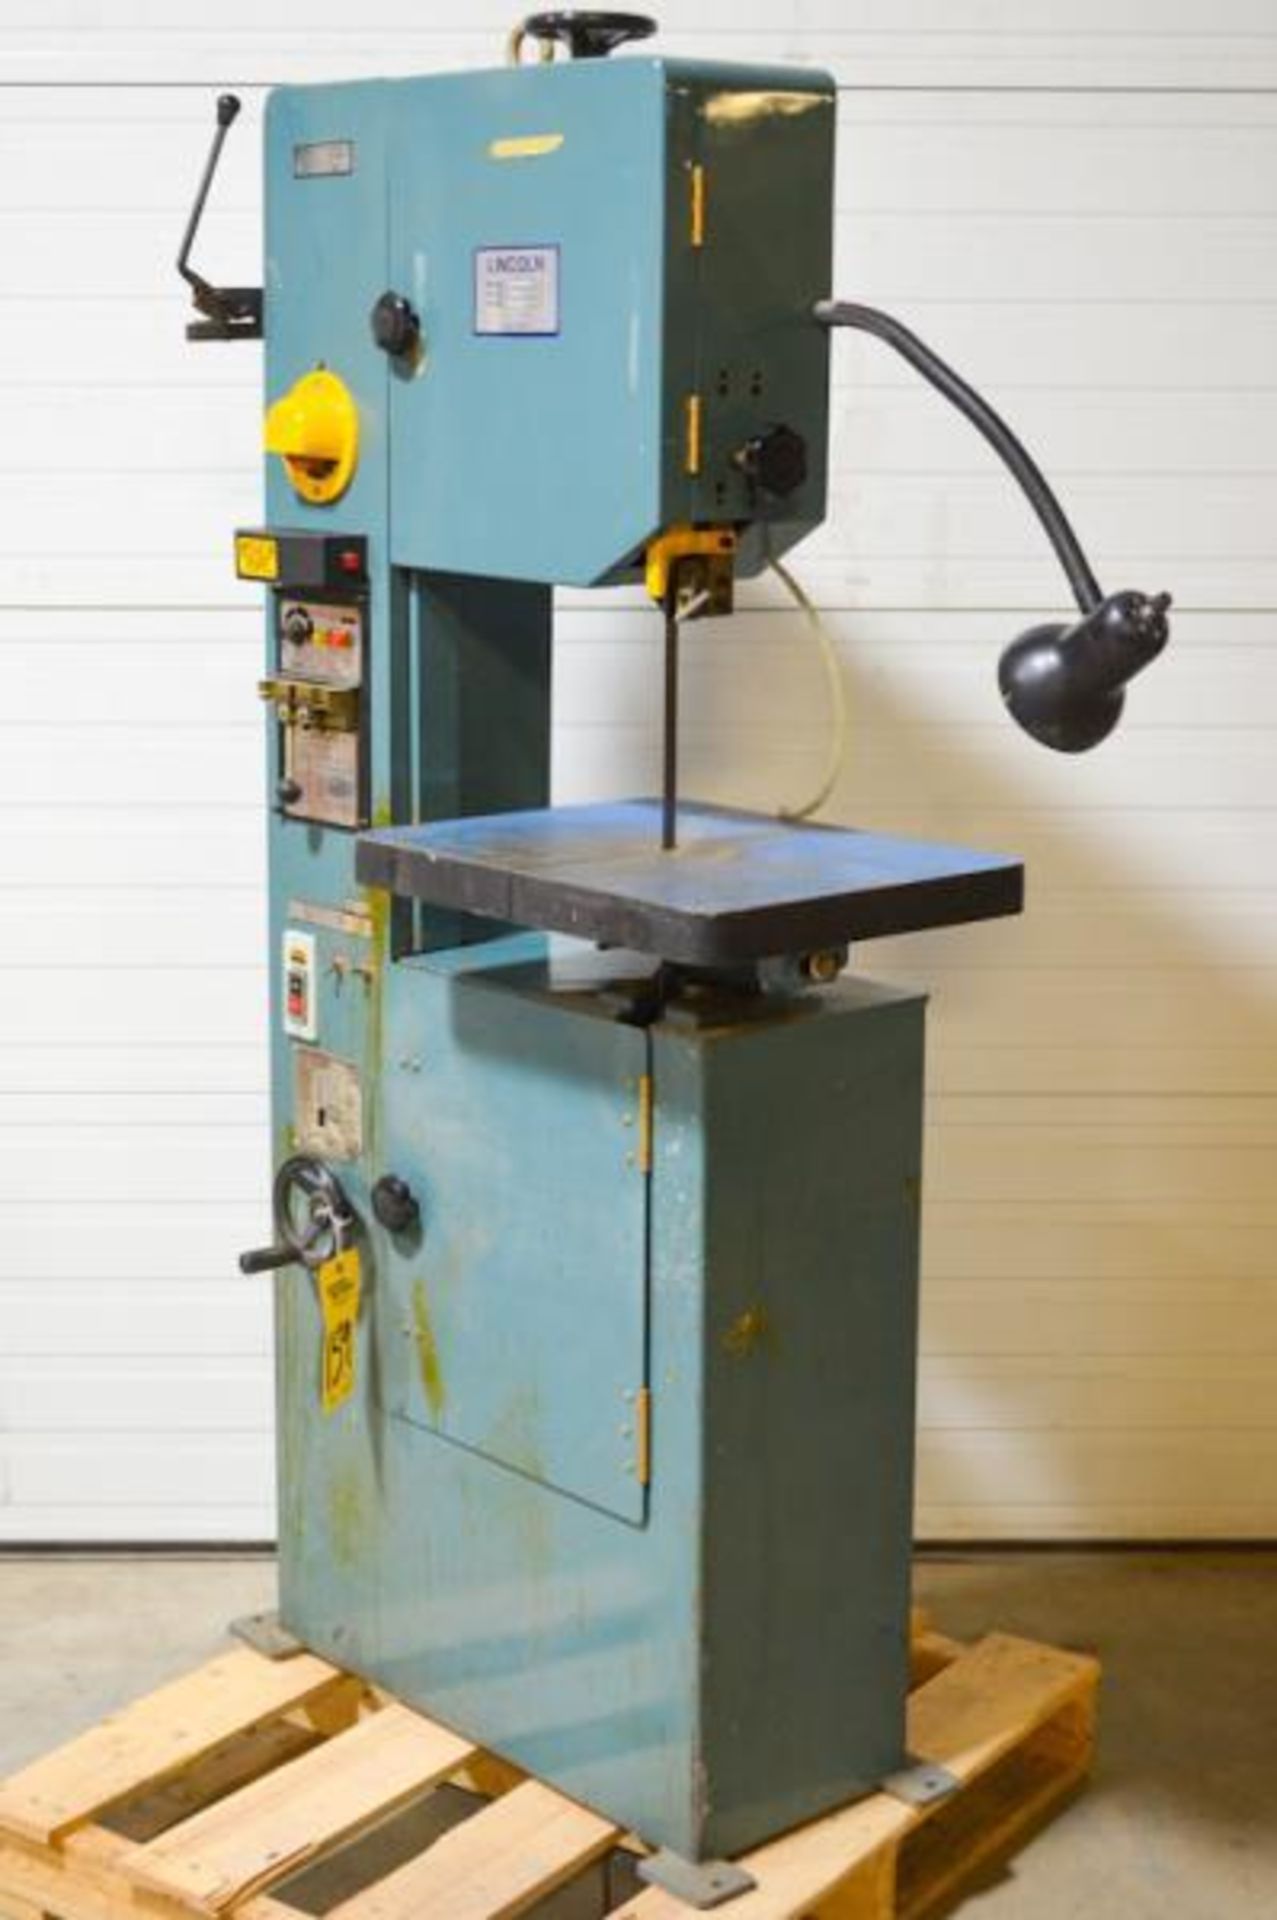 LINCOLN RF66KB361 14” VERTICAL CONTOUR METAL CUTTING BAND SAW, 16” X 19.75” X 38”H TABLE TILE 15